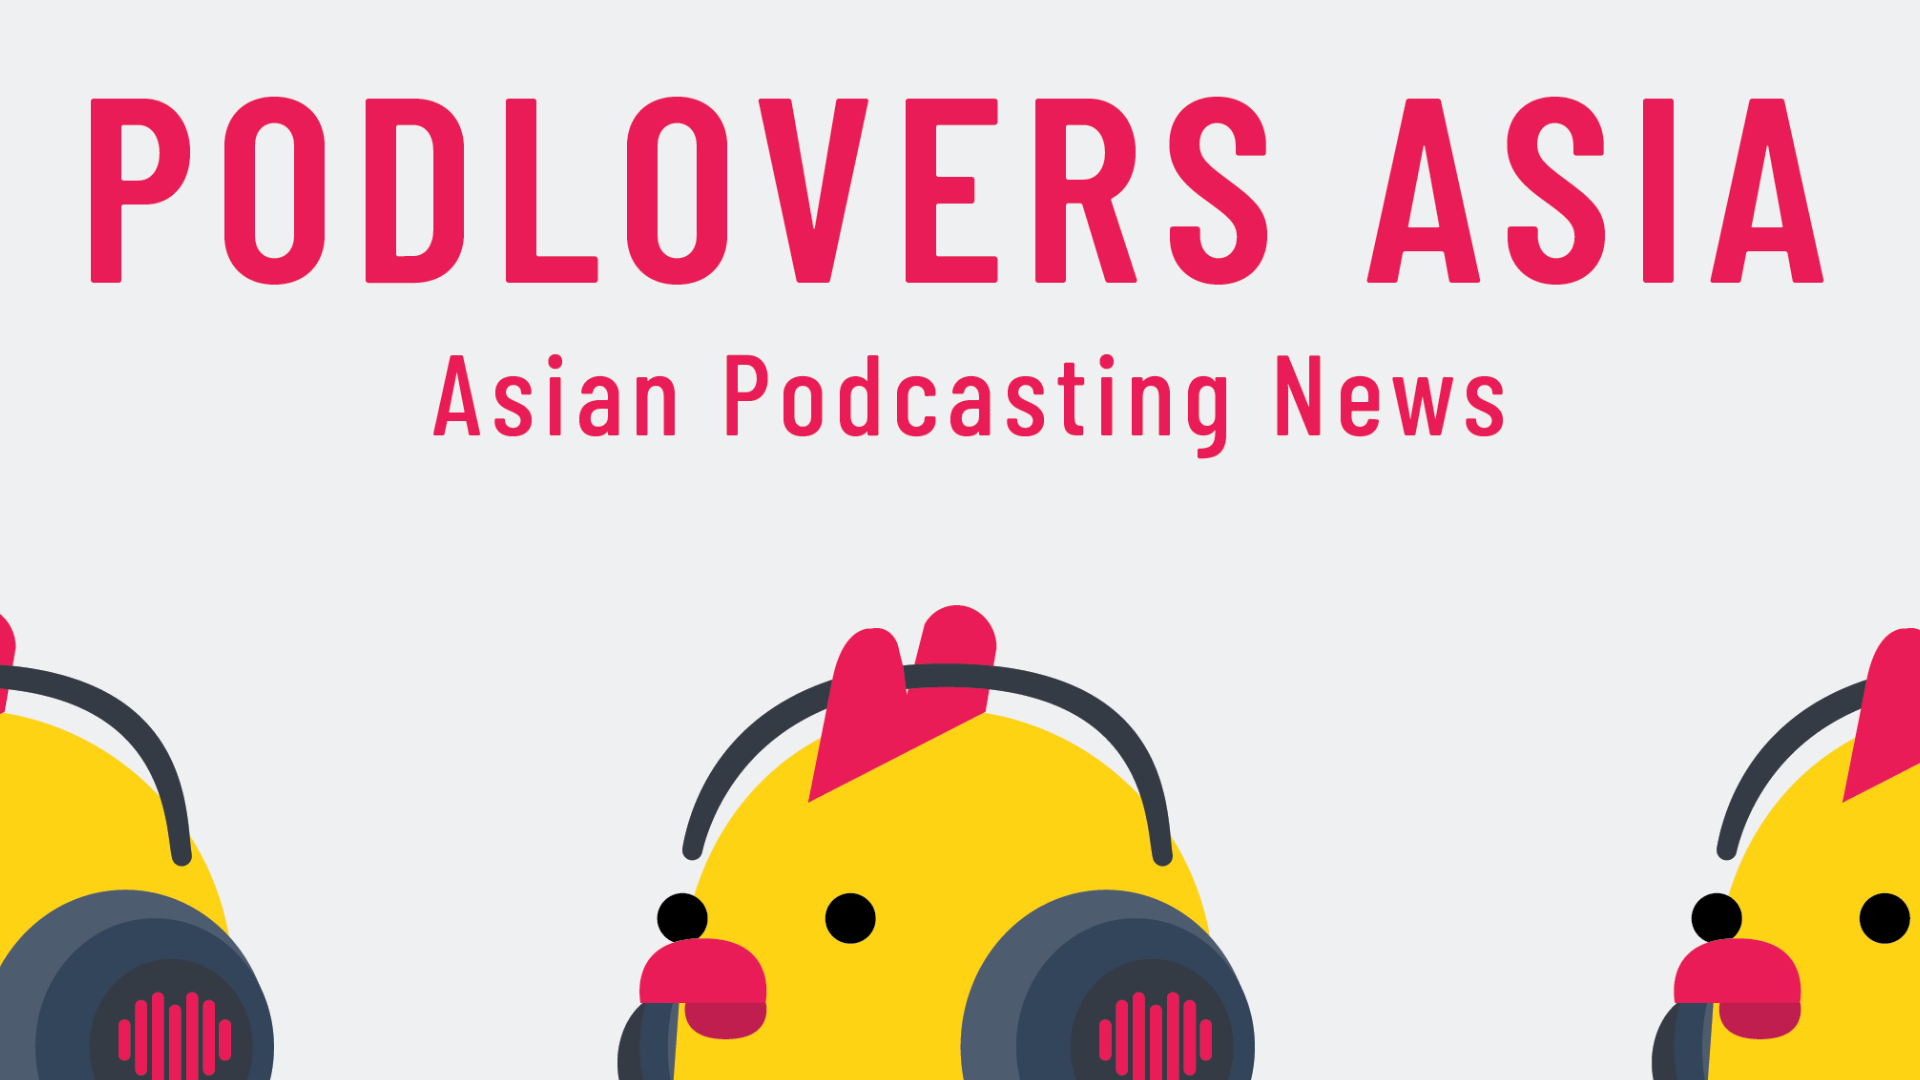 Evo Terra of Podcast Pontifications shares starting Podcast #40, why privacy is an illusion and growing the Asian podcast ecosystem